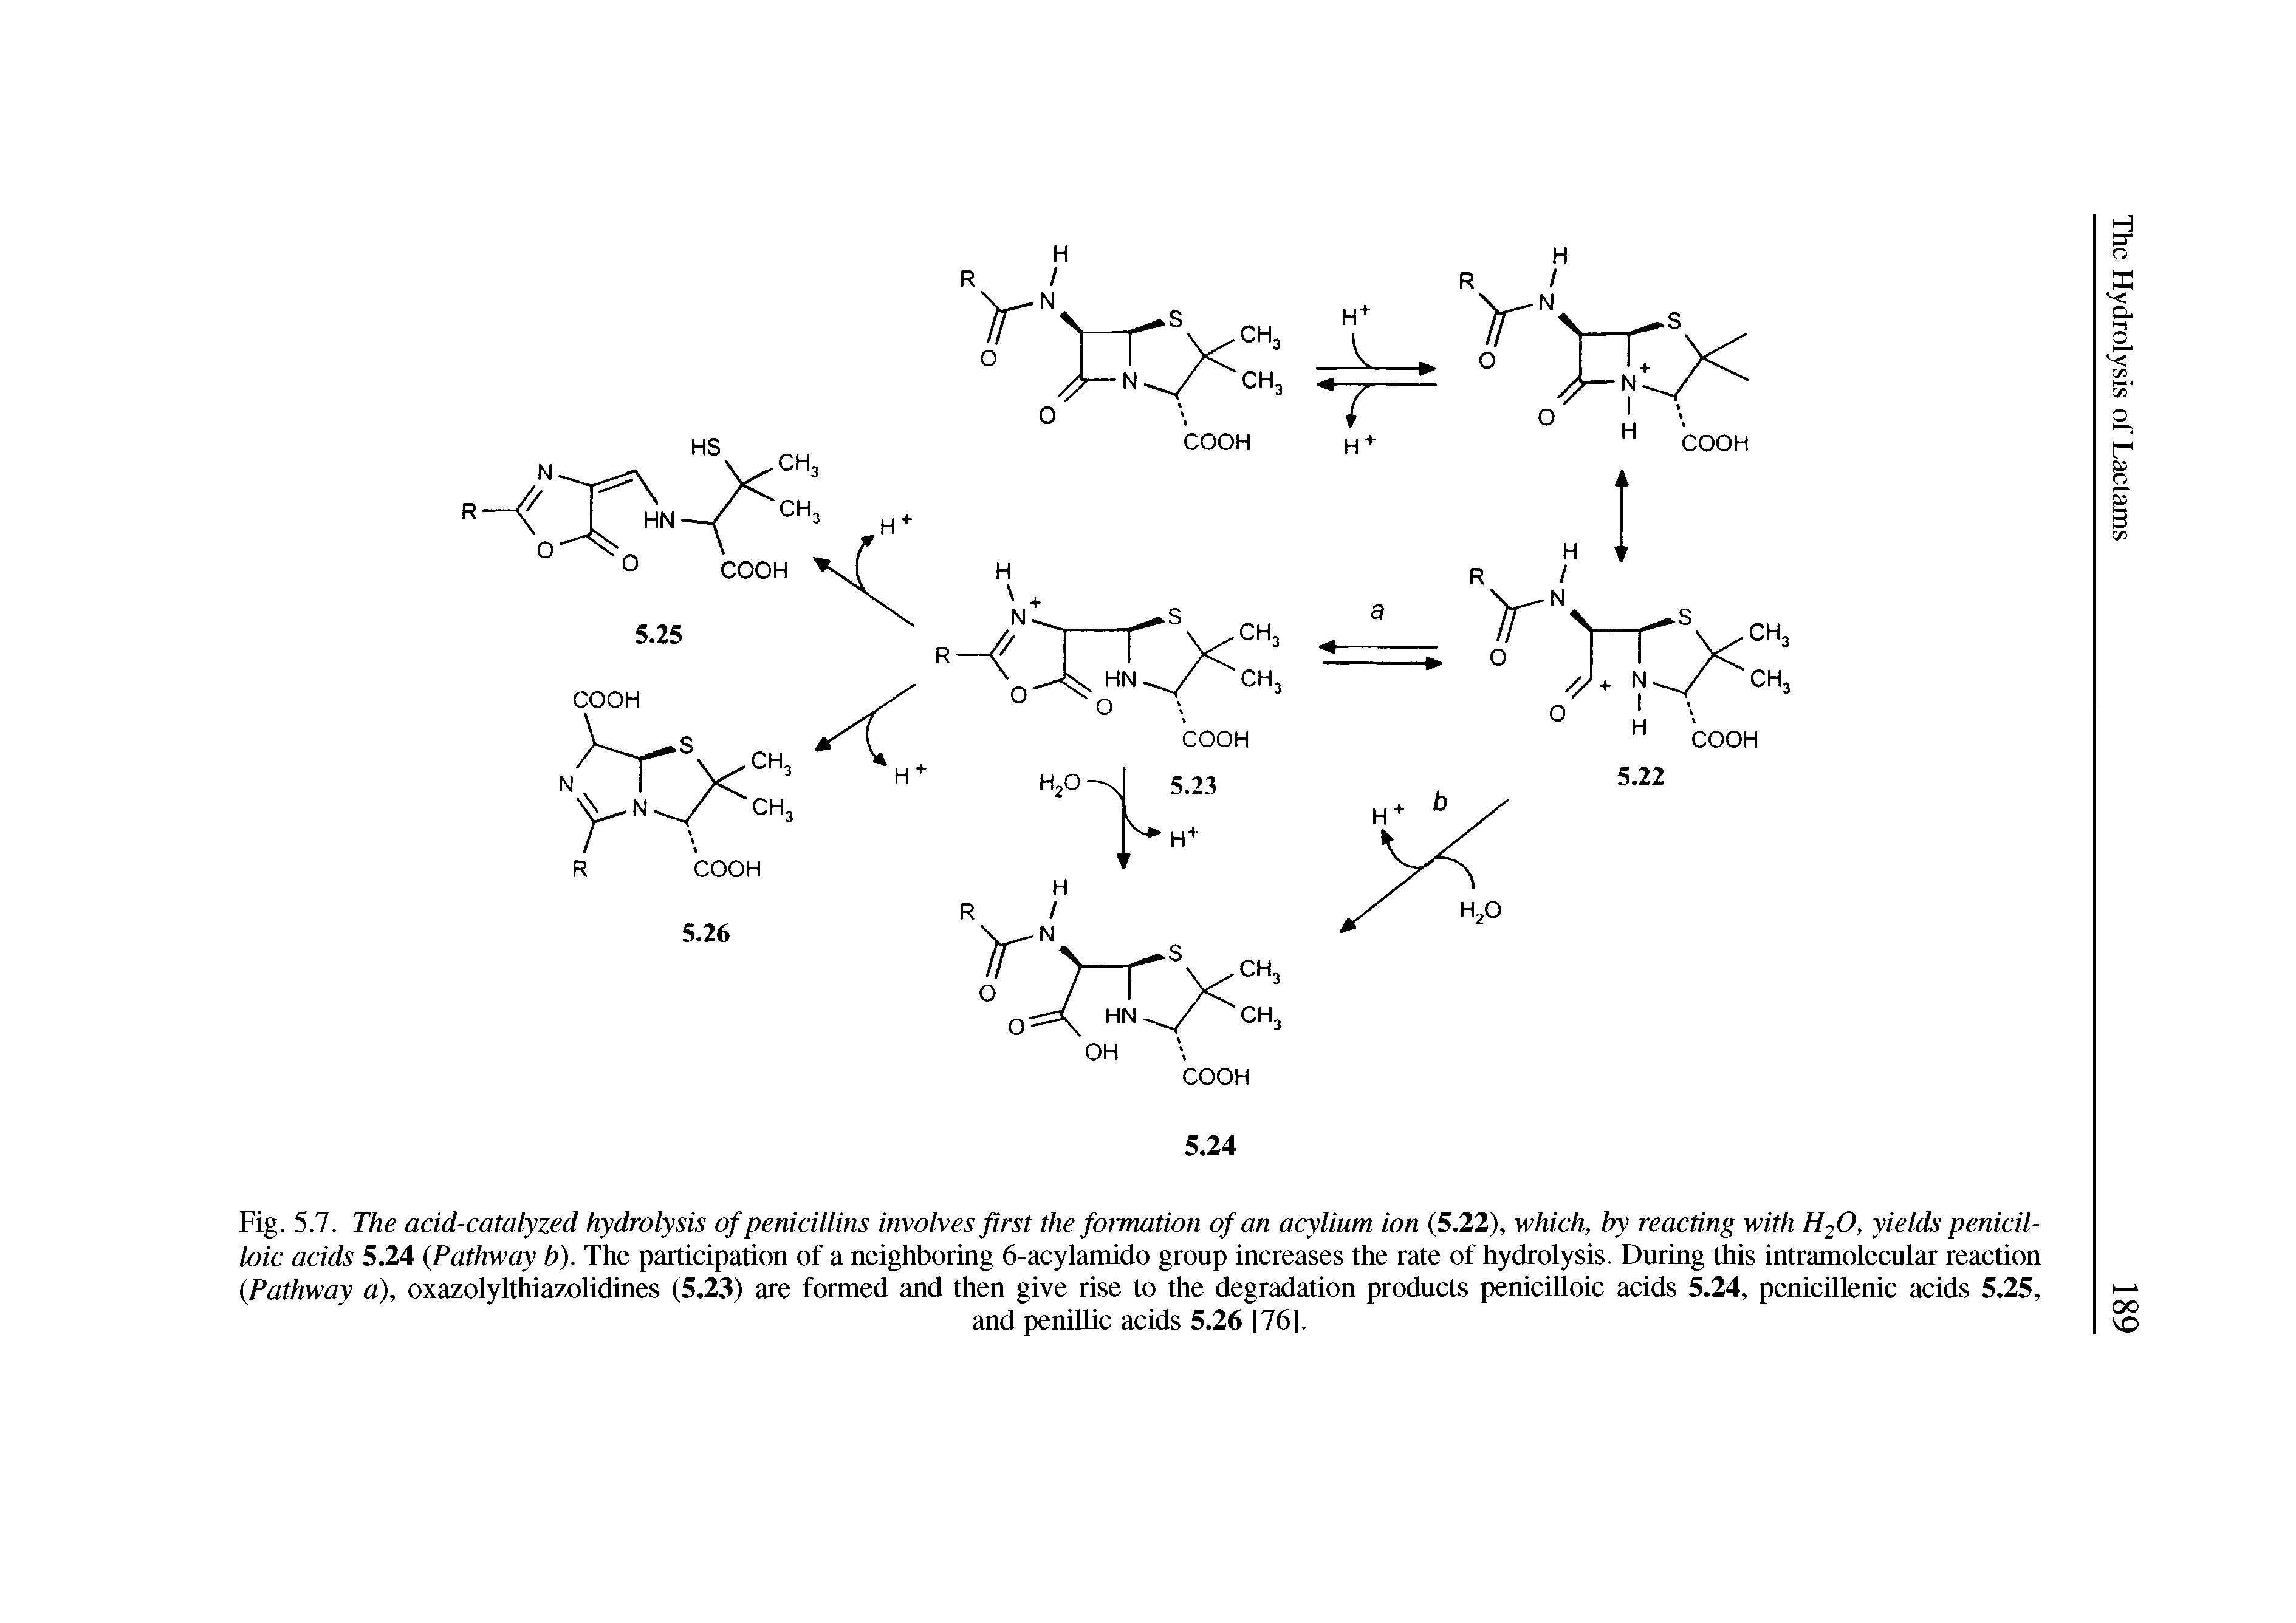 Fig. 5.7. The acid-catalyzed hydrolysis of penicillins involves first the formation of an acylium ion (5.22), which, by reacting with H20, yields penicil-loic acids 5.24 (Pathway b). The participation of a neighboring 6-acylamido group increases the rate of hydrolysis. During this intramolecular reaction (Pathway a), oxazolylthiazolidines (5.23) are formed and then give rise to the degradation products penicilloic acids 5.24, penicillenic acids 5.25,...